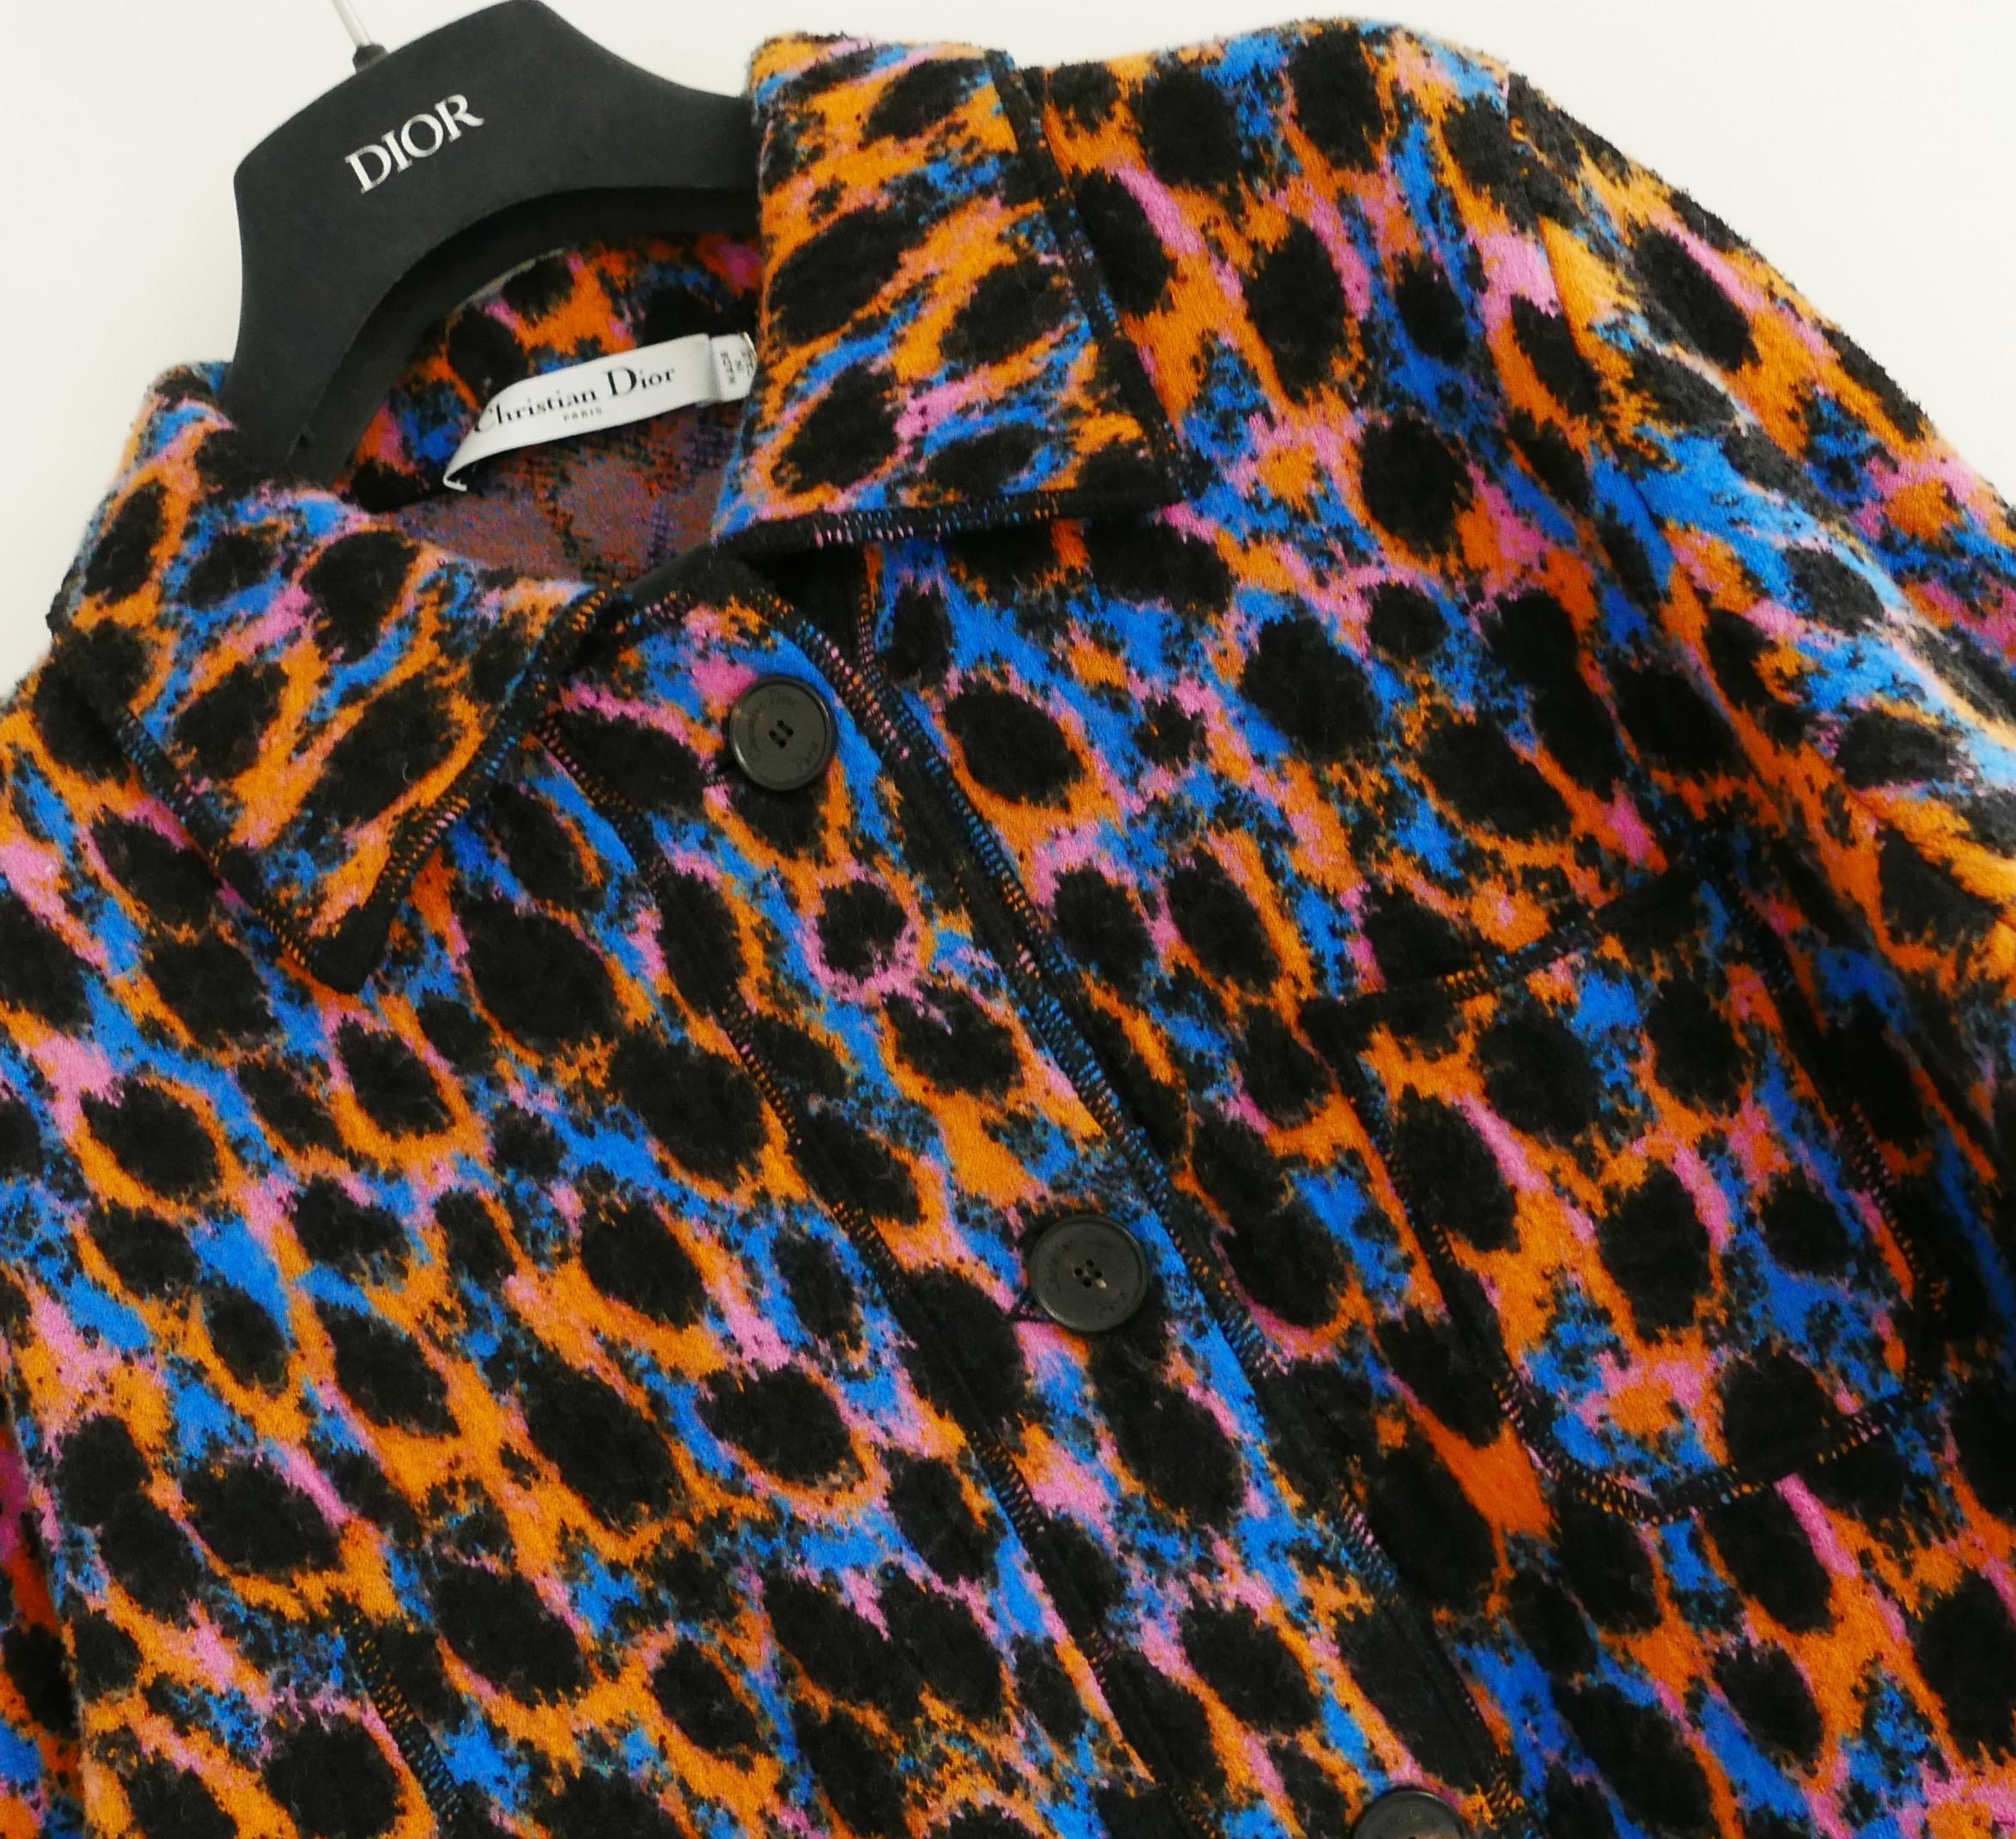 Amazing Dior Leopard Neon jacket from the top from the Spring 2022 Collection. Bought for £2750 and new with tag/spare button, hanger and suit carrier. Made from thick felted wool mix with a vibrant Fantaisie coloured leopard weave with contrast